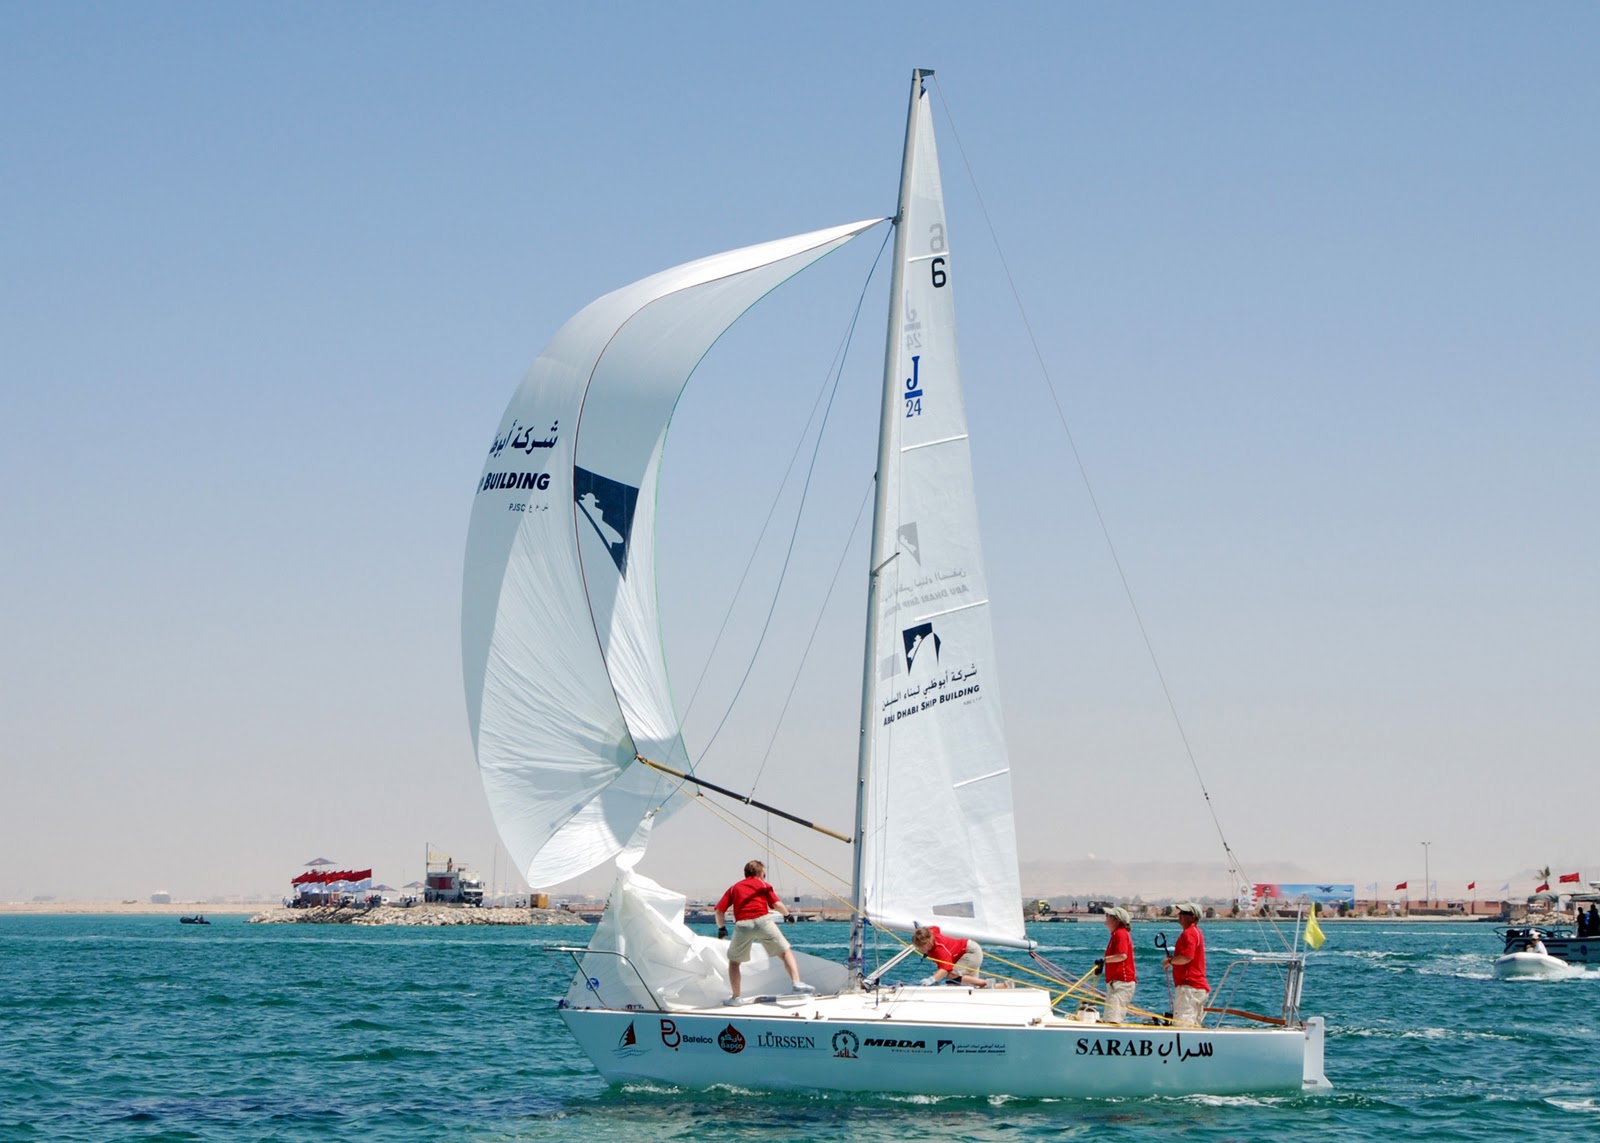 The U.S. Armed Forces Sailing Team by Eric Brown